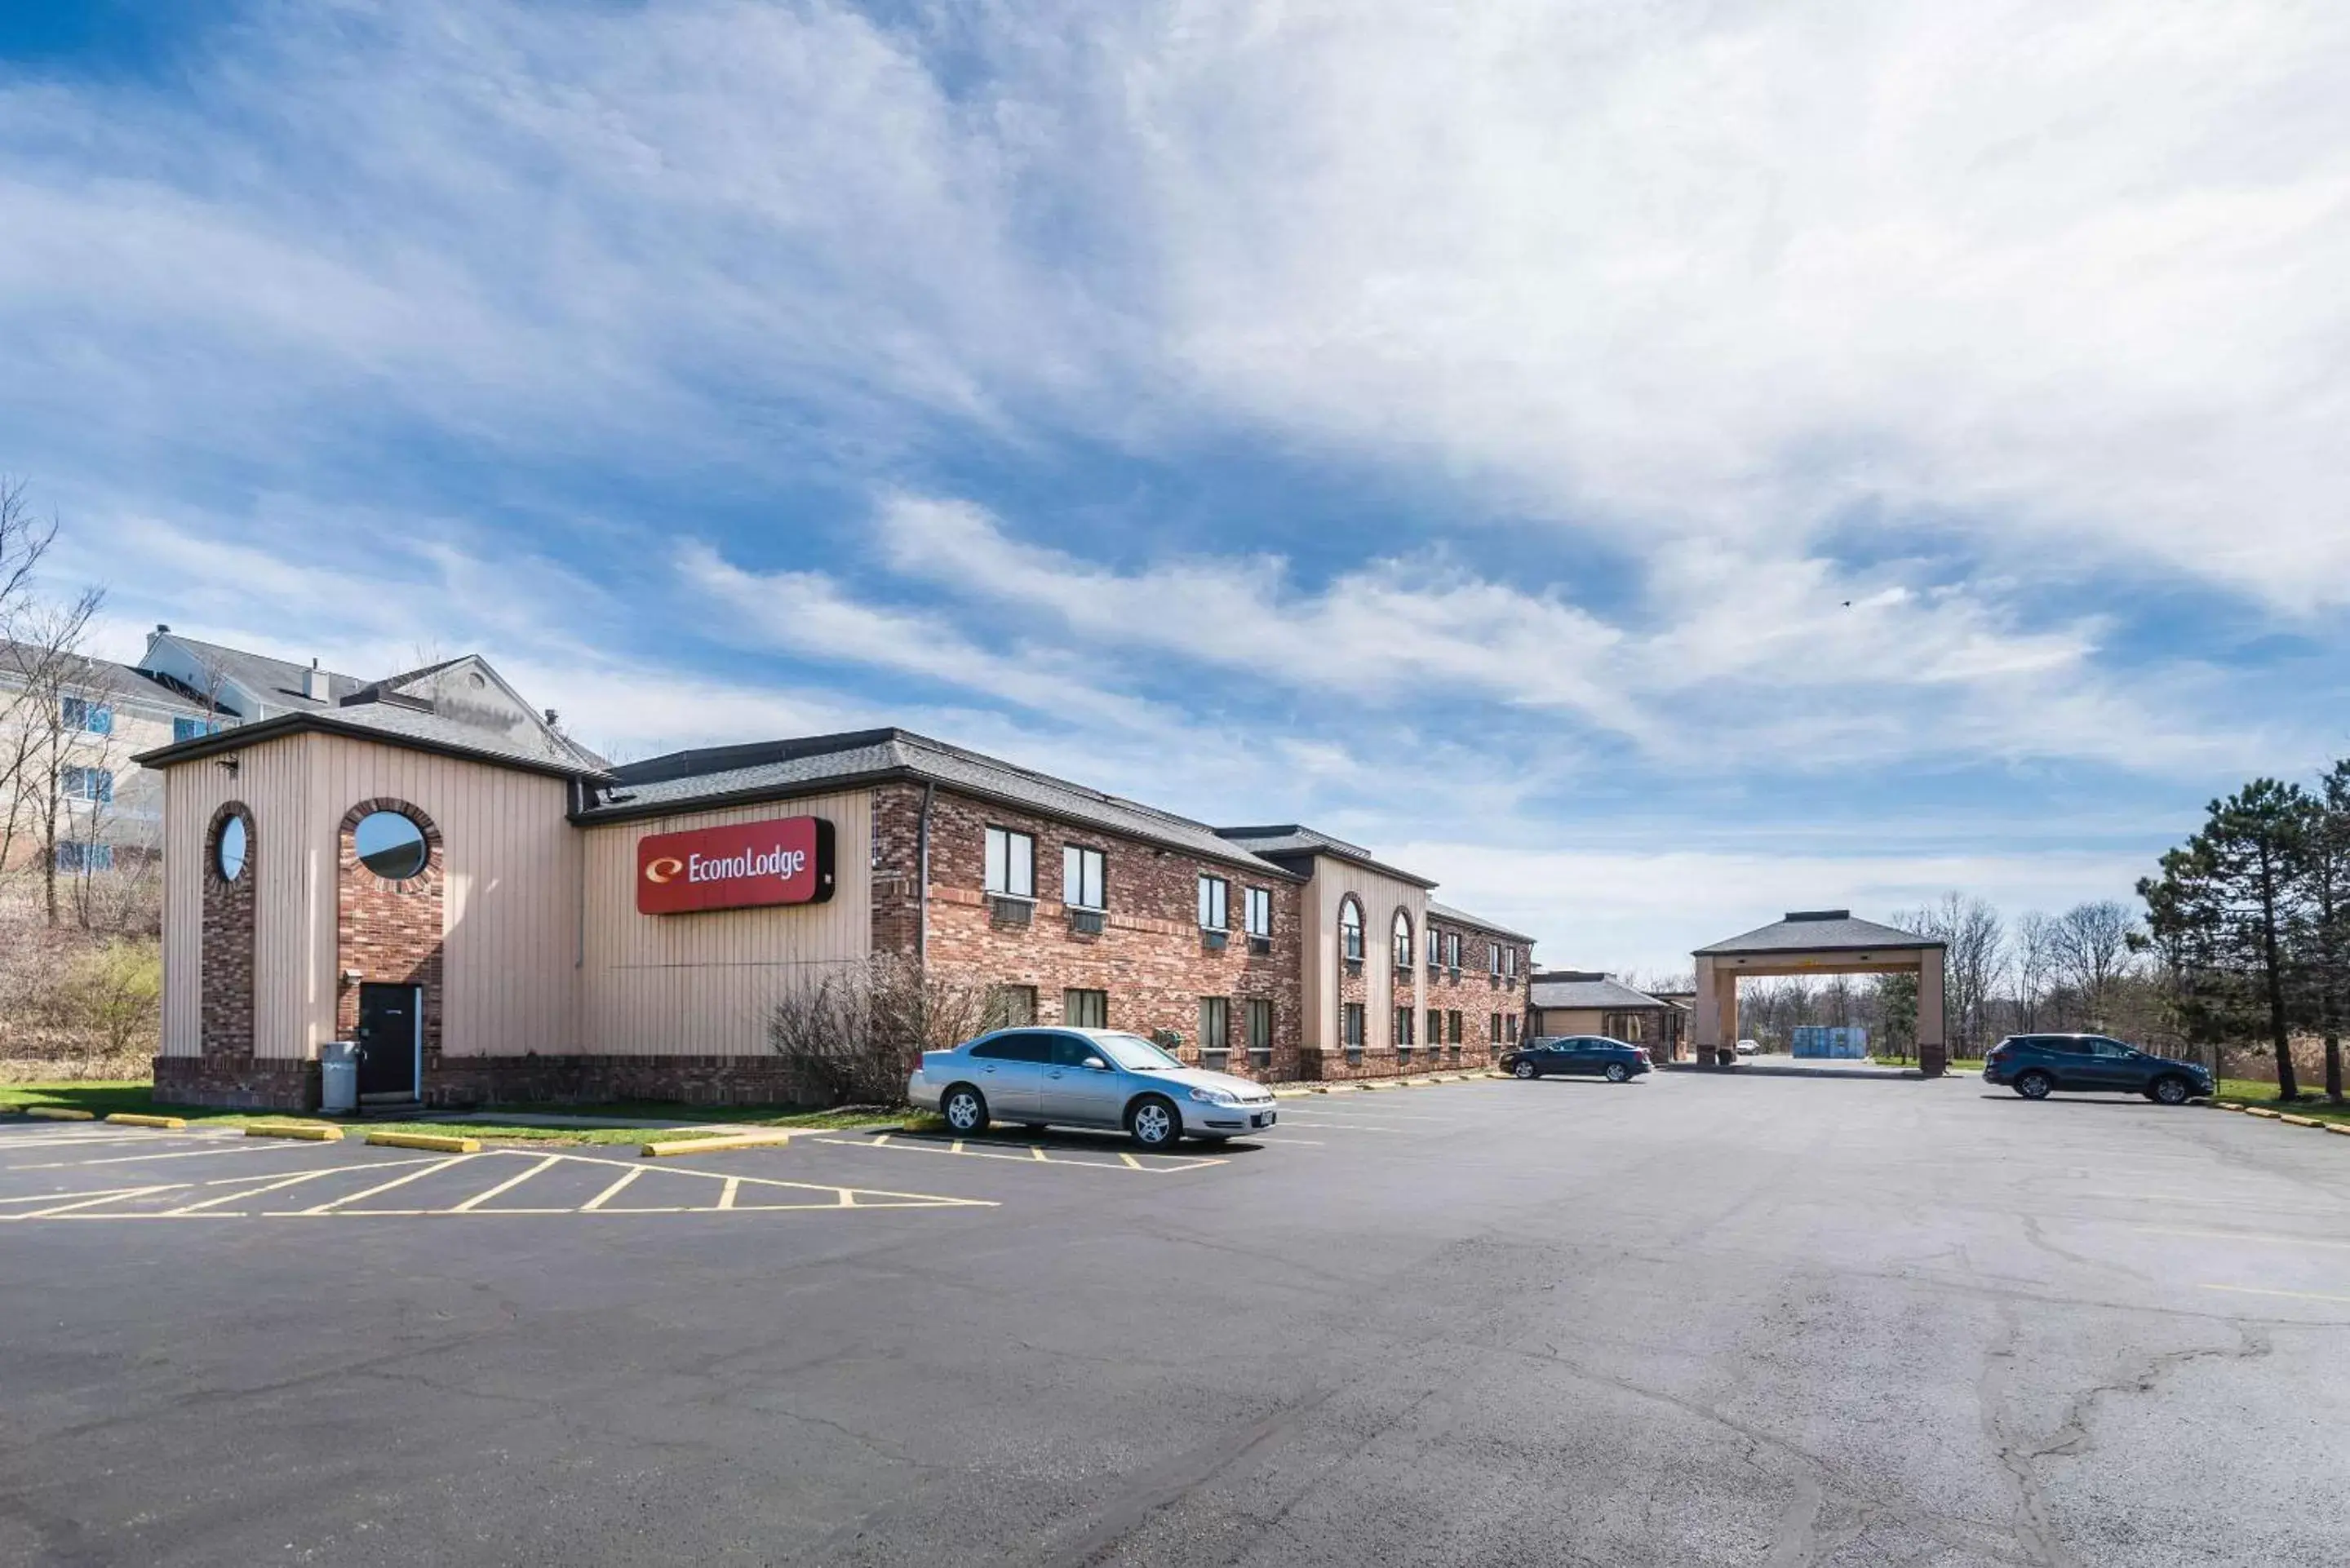 Property building in Econo Lodge Cleveland Southeast - Kent